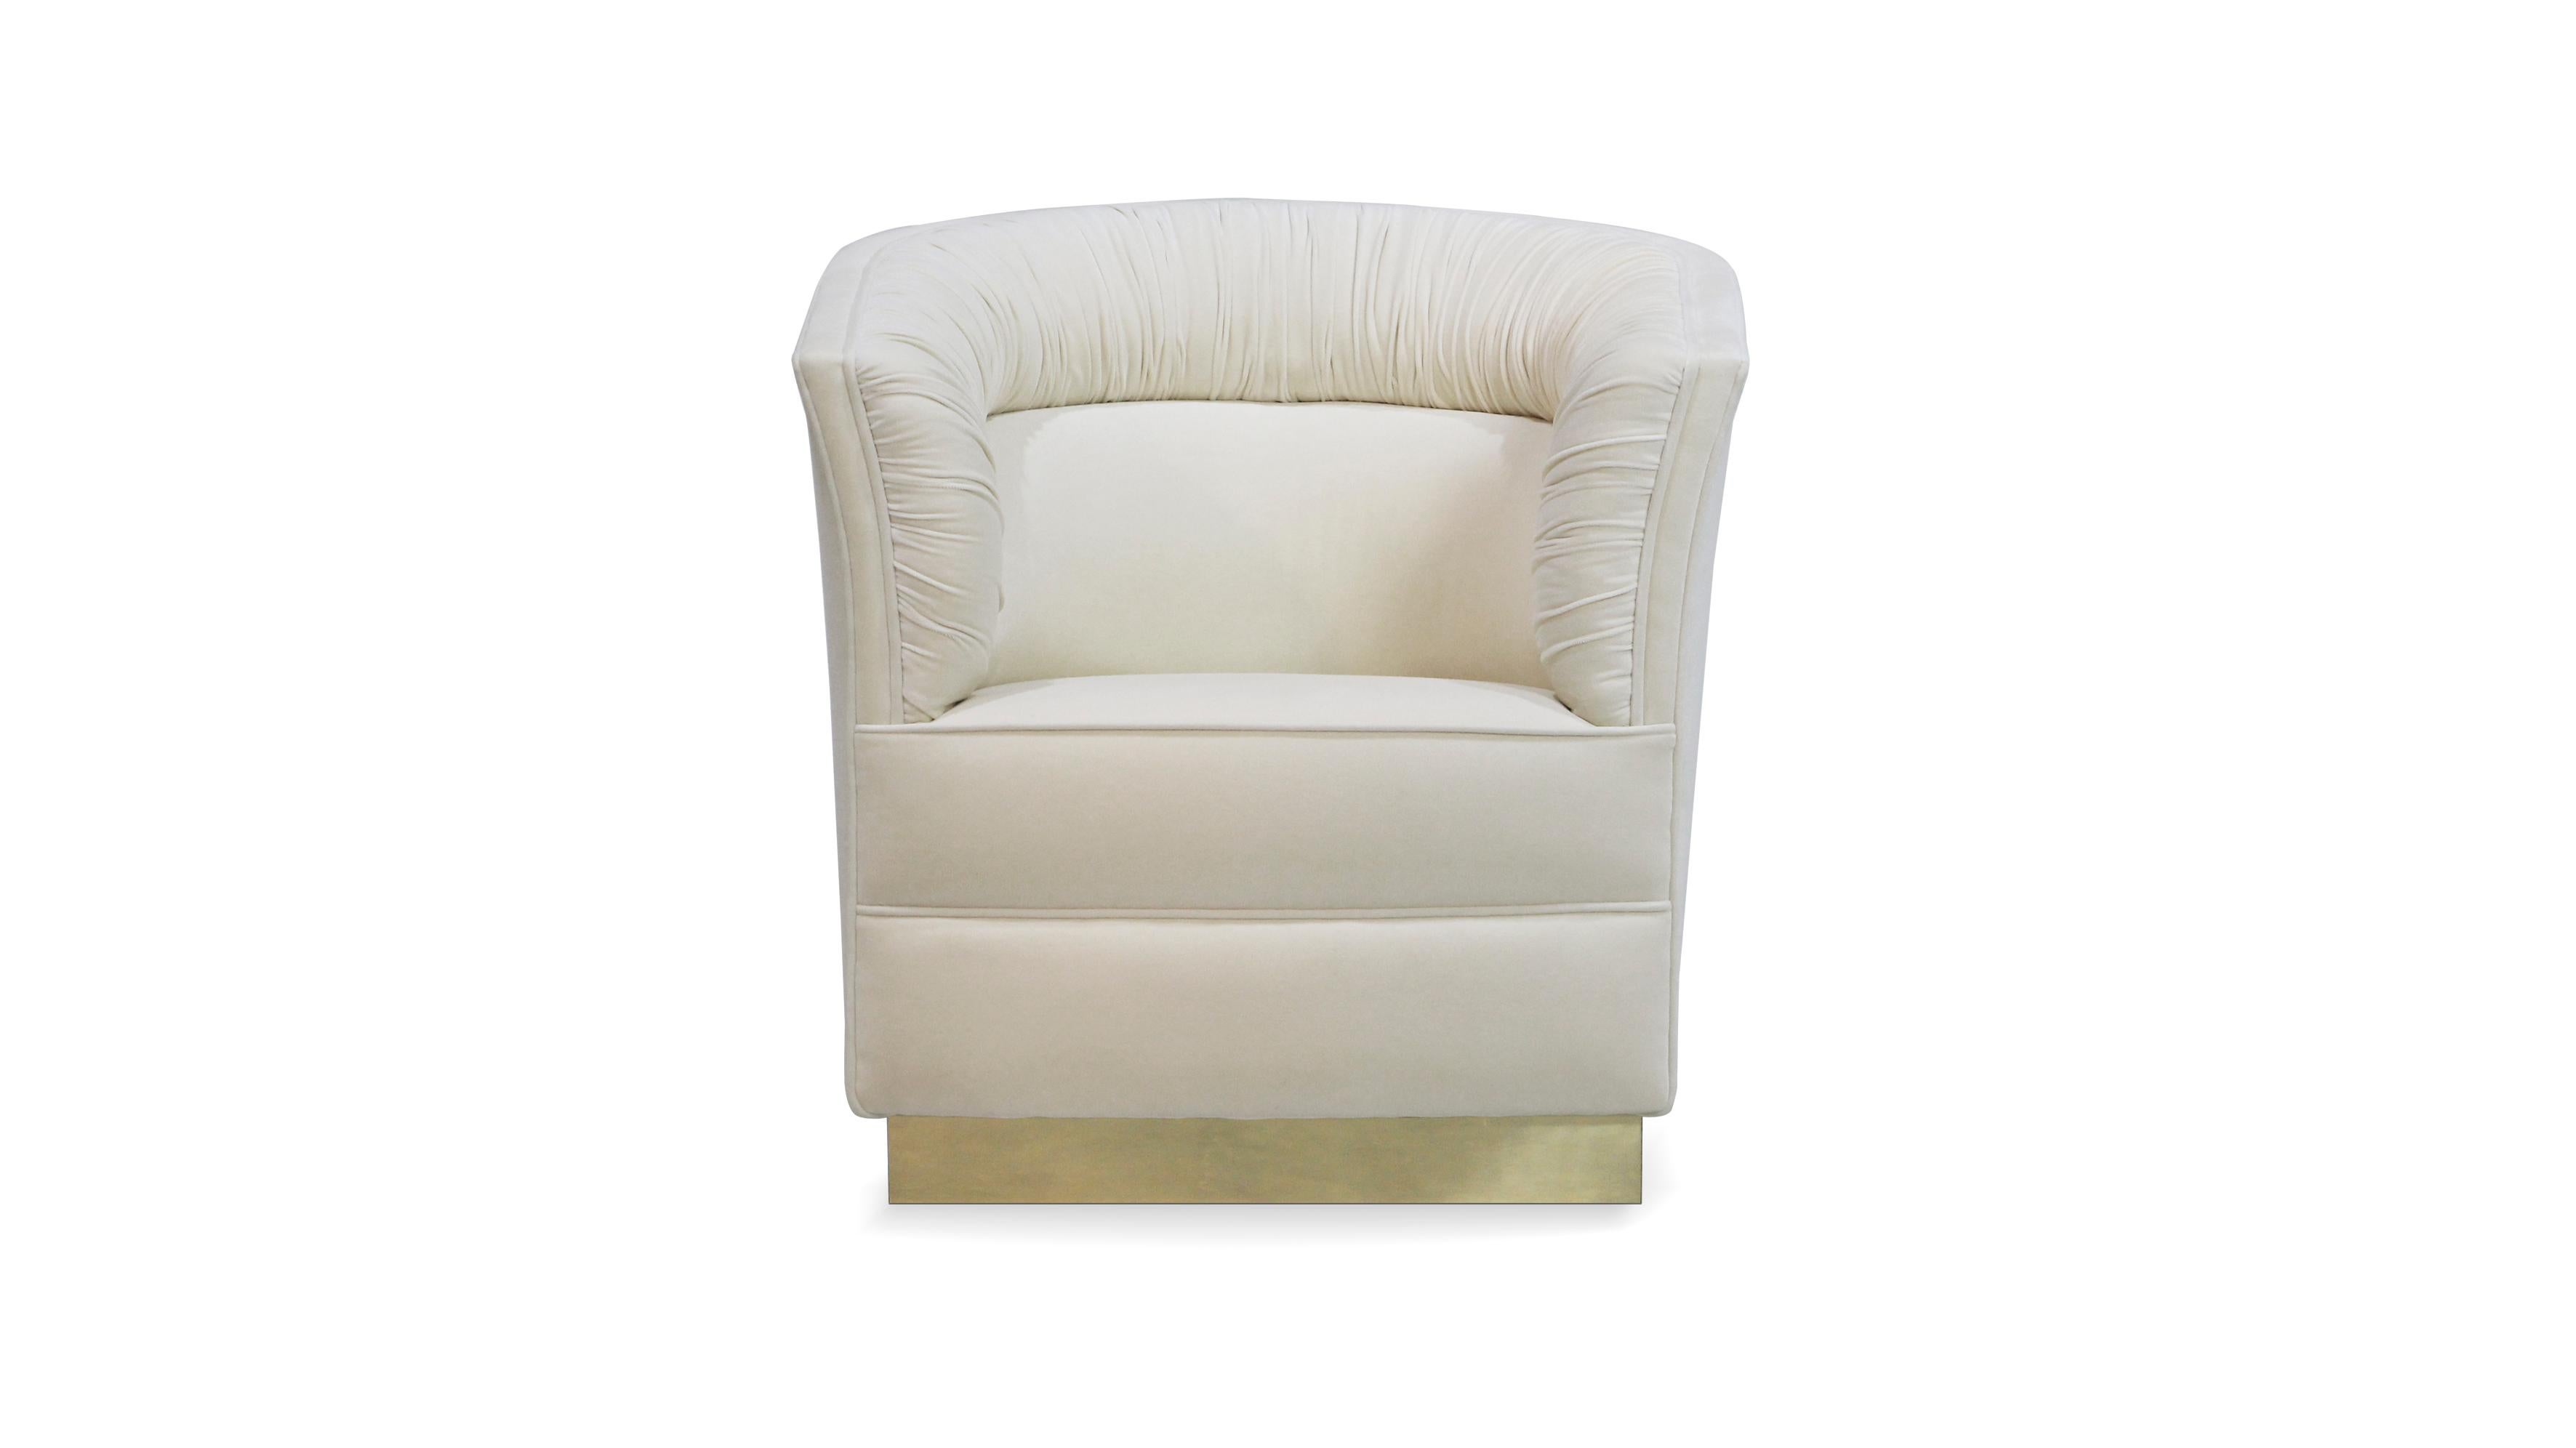 Lean back and be held by the soft fabric arms of the Lovely chair. Her curves softly unfold like a Lily in bloom contrasted by her trendy square base, wrapped with a posh metal band.

Options
Upholstery: Available in any fabric from the Koket